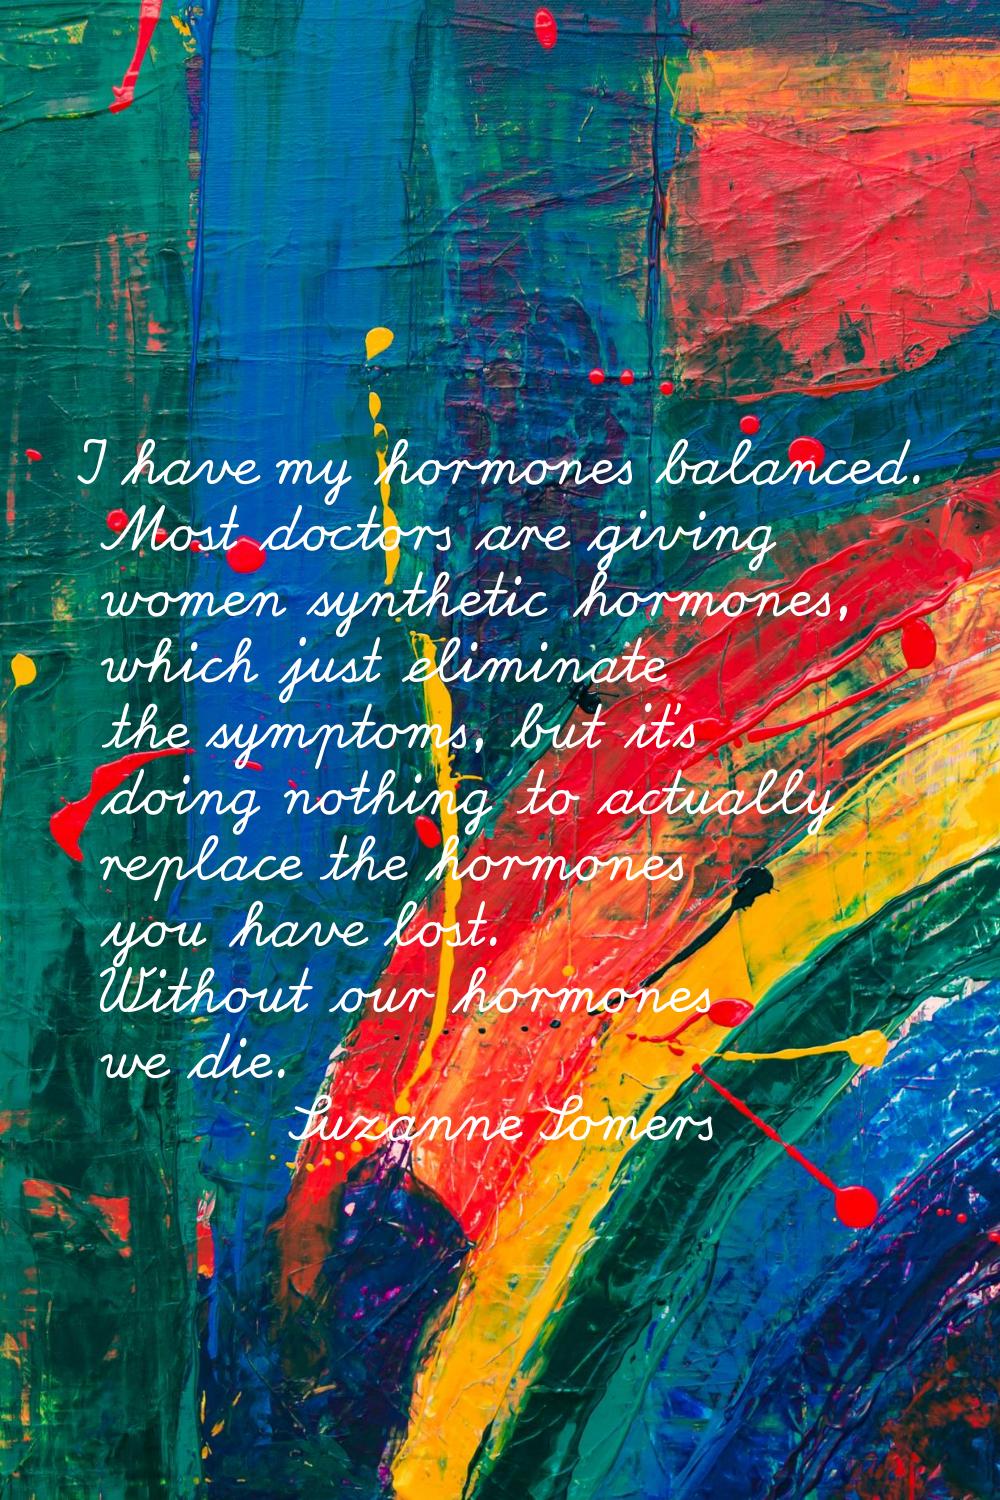 I have my hormones balanced. Most doctors are giving women synthetic hormones, which just eliminate